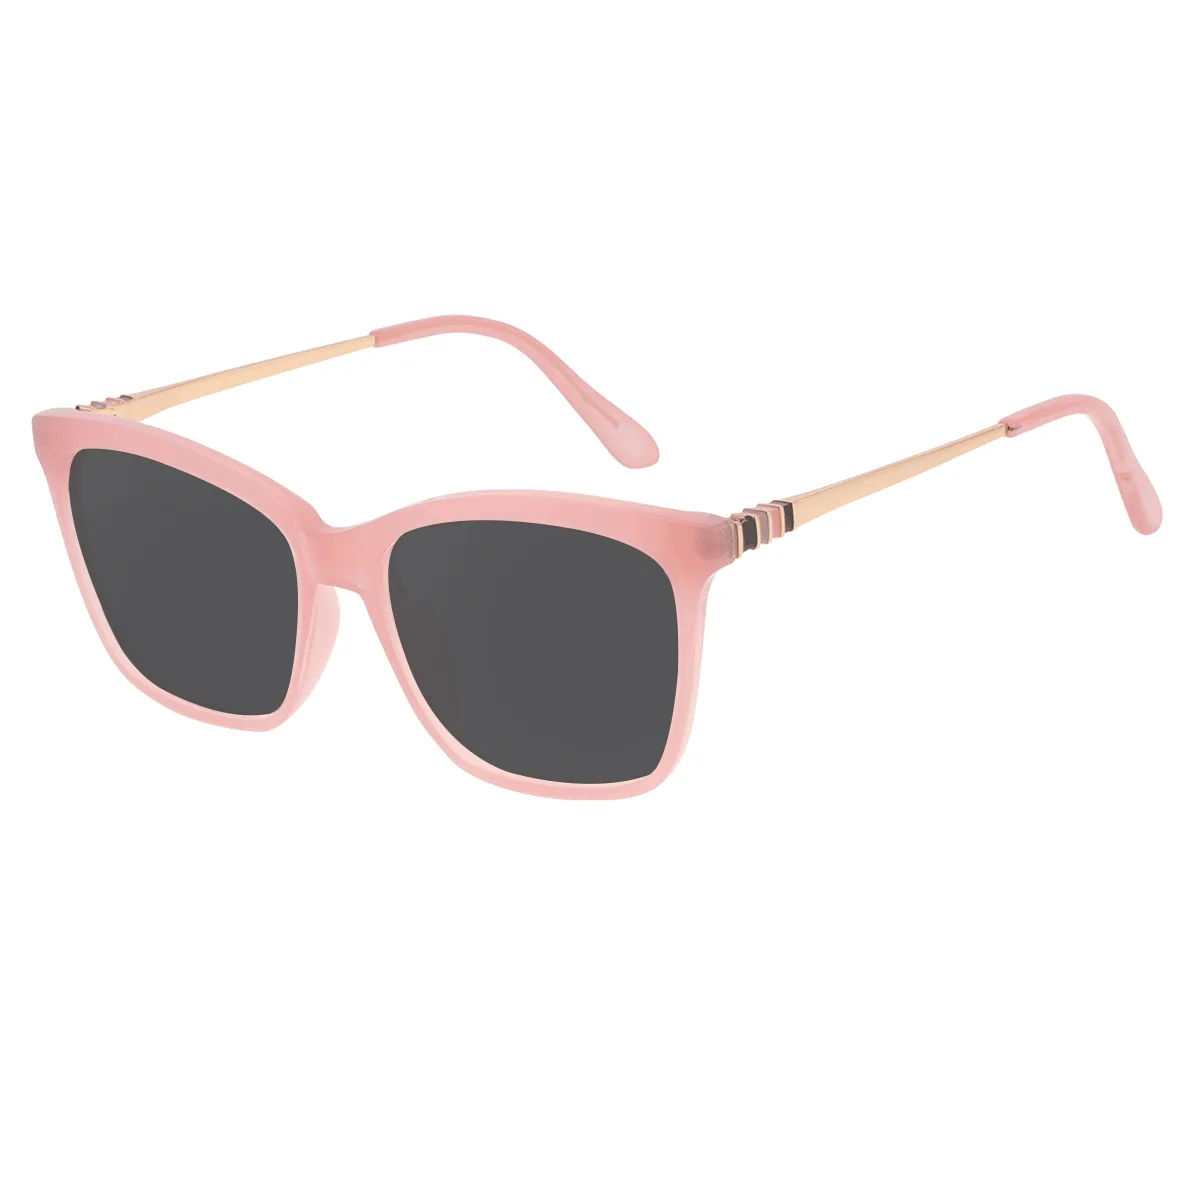 Asquith - Square Pink Sunglasses for Men & Women